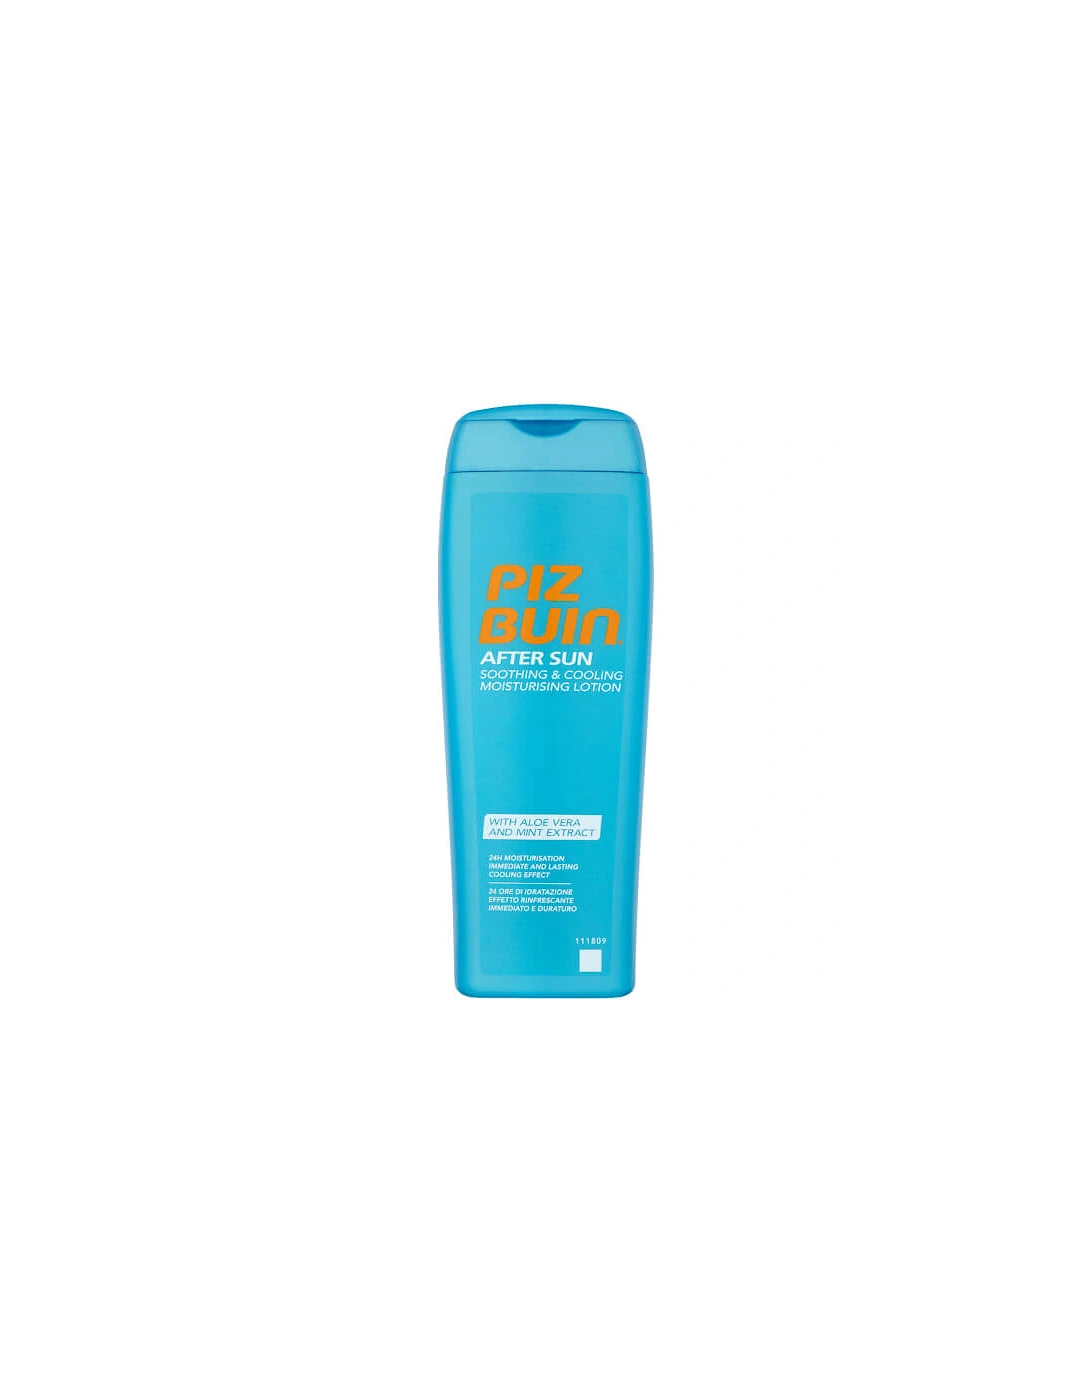 After Sun Soothing and Cooling Moisturising Lotion 200ml - Piz Buin, 2 of 1